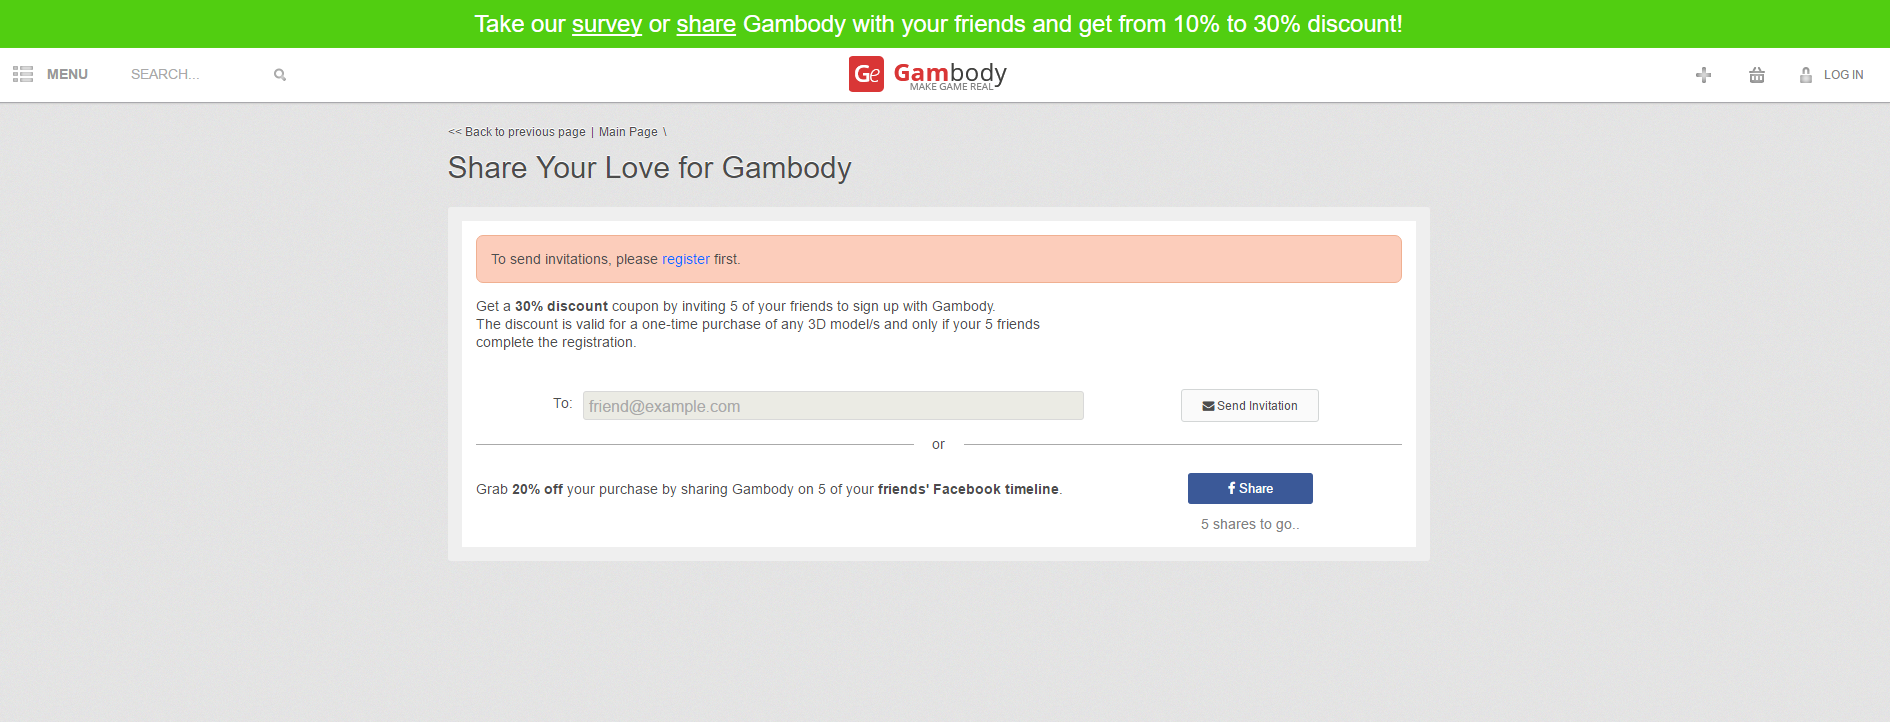 Invite 5 of your friends to register with Gambody and get 30% discount